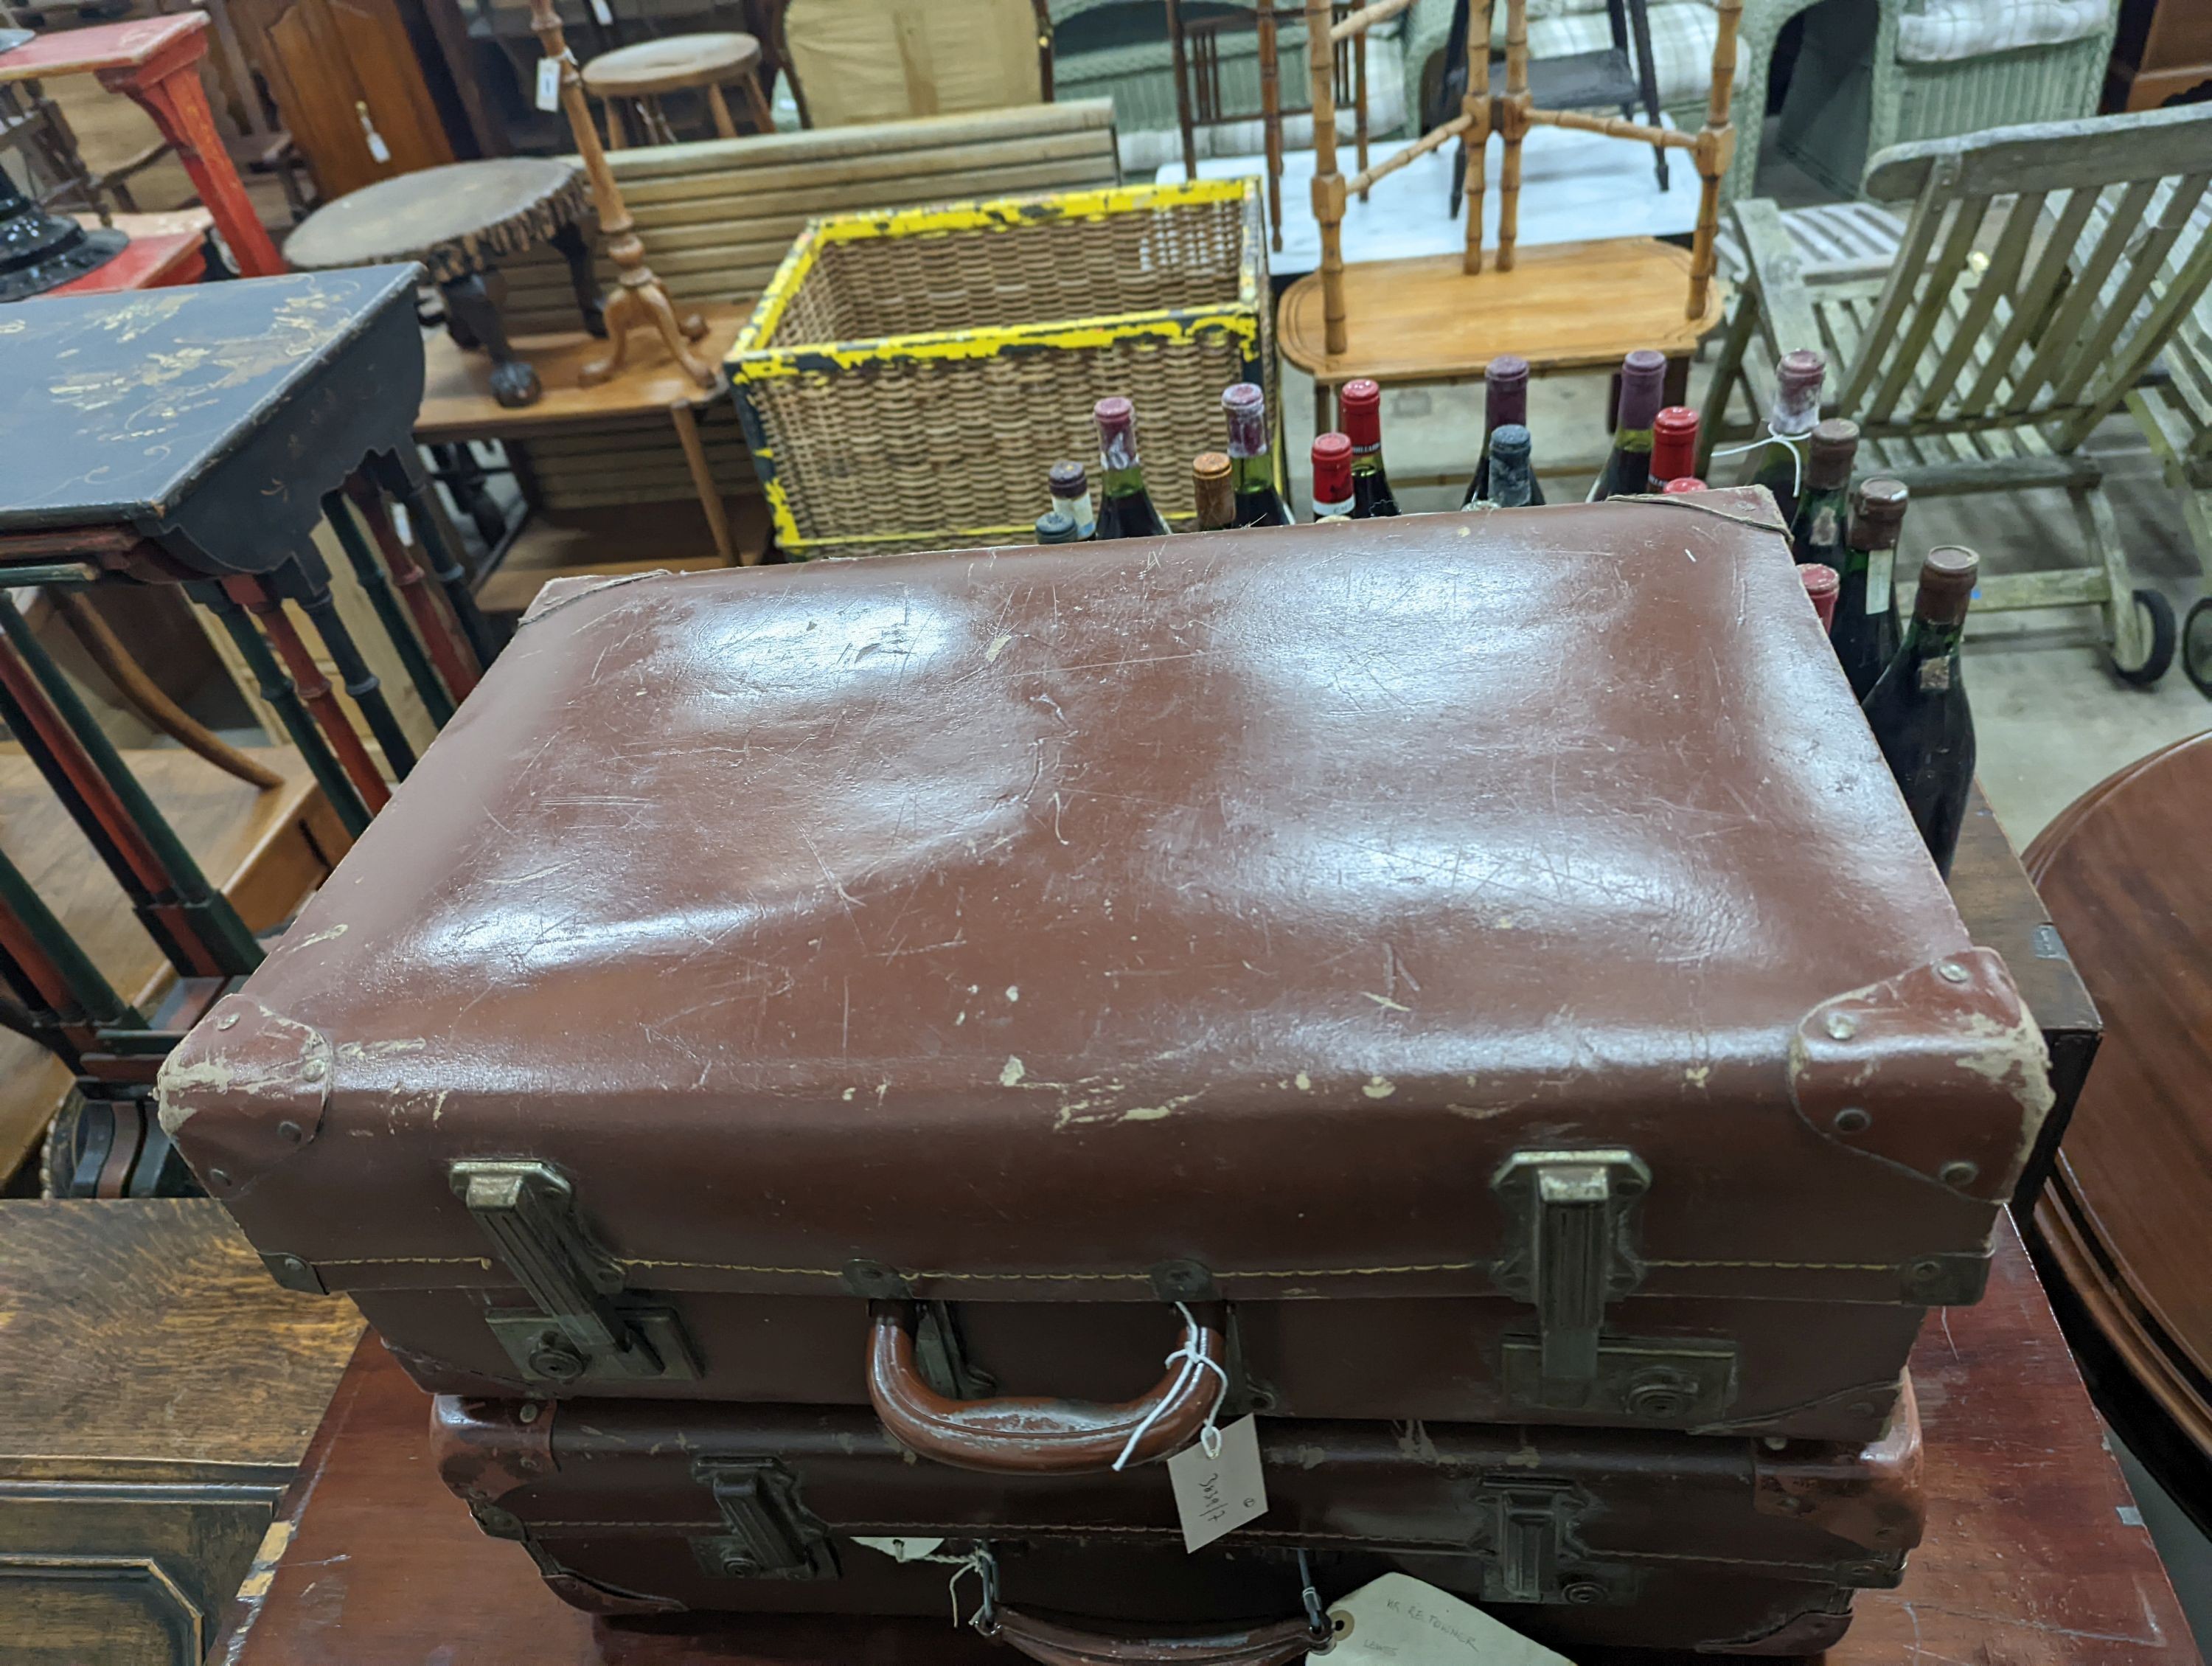 Two vintage suitcases, larger length 61cm, width 35cm, height 19cm